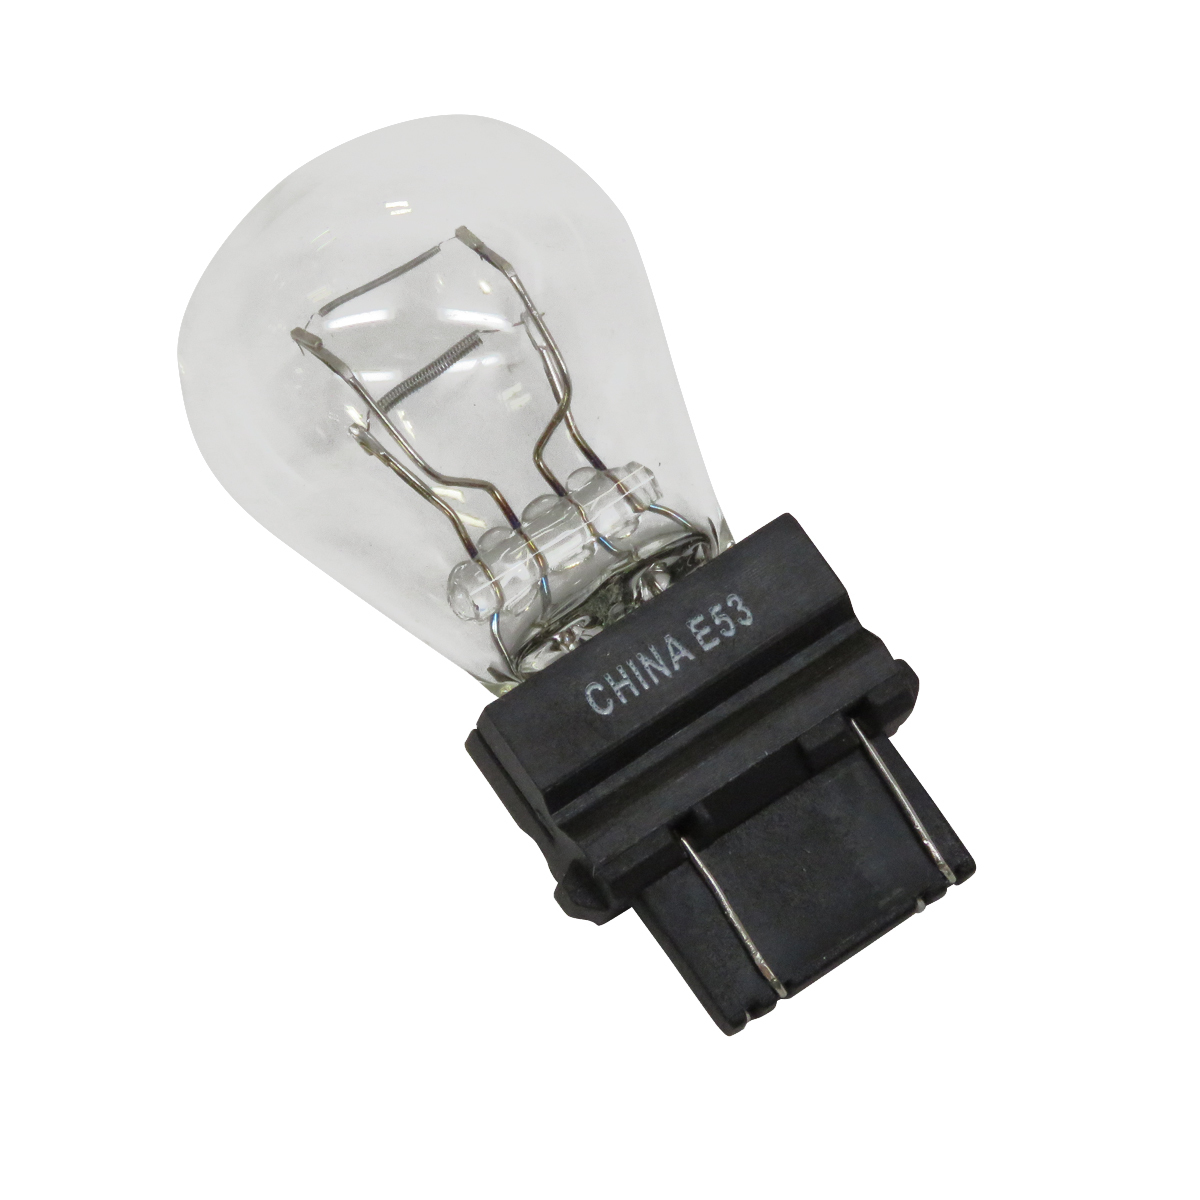 Light Bulb for X400, X500, and X700 Series Mowers and CS, HPX, TH, TS, TX, and XUV Gators